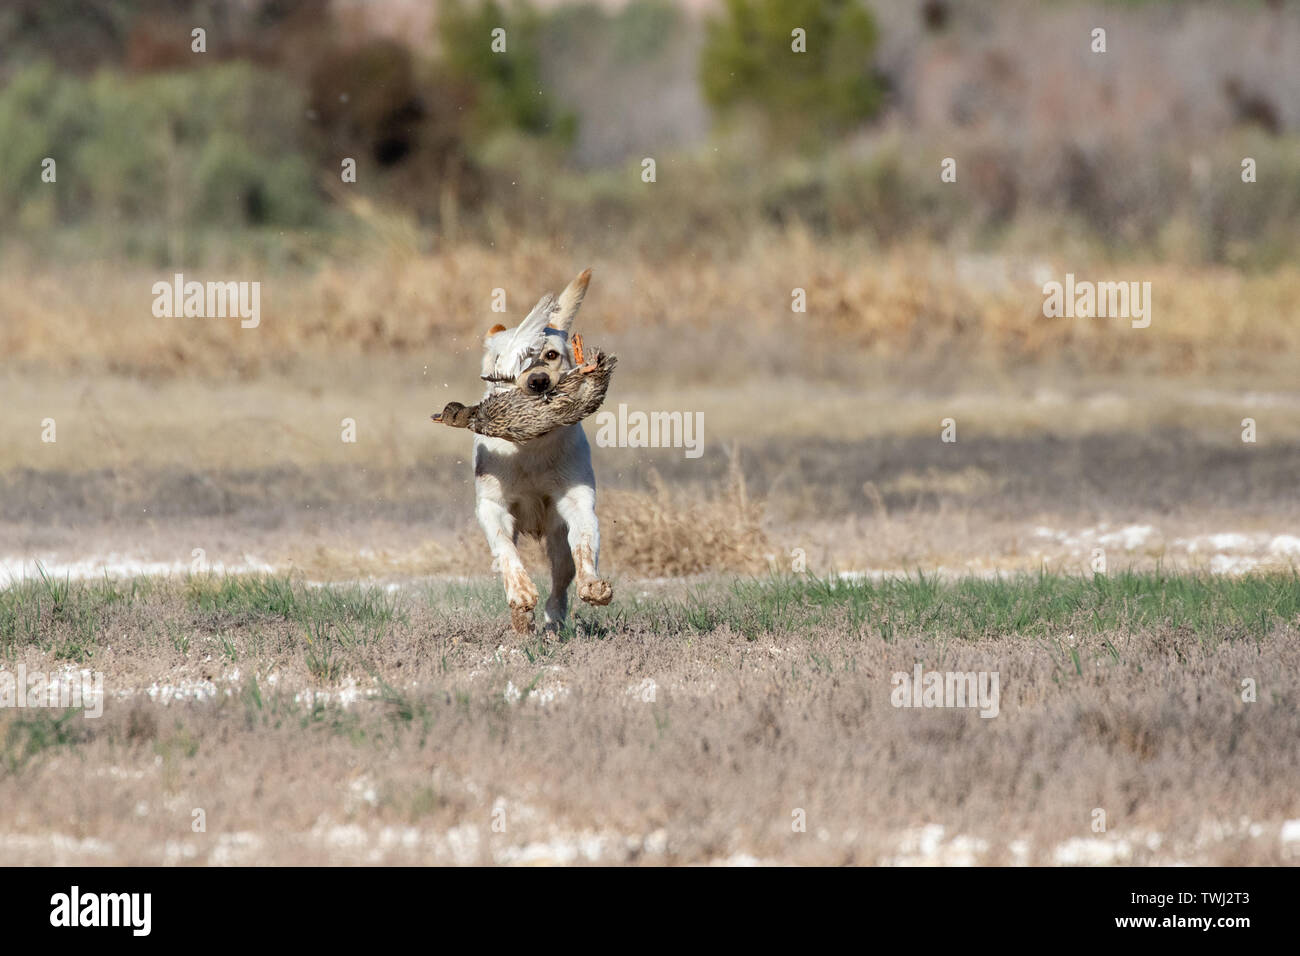 Yellow lab with a duck during a hunt field retrieving test Stock Photo